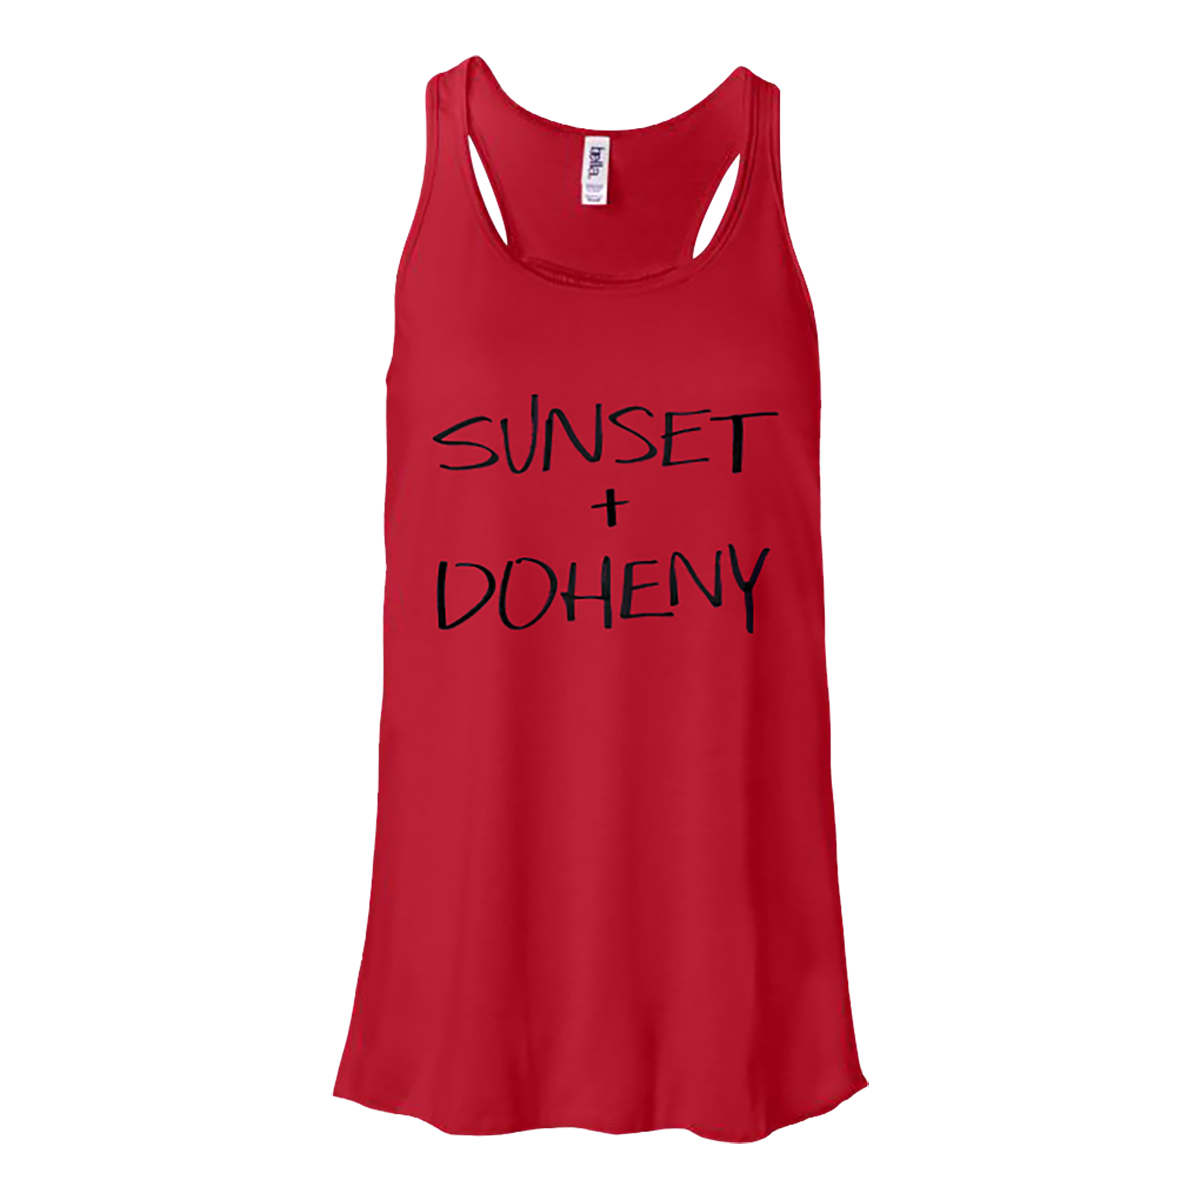 sunset + doheny red tank top